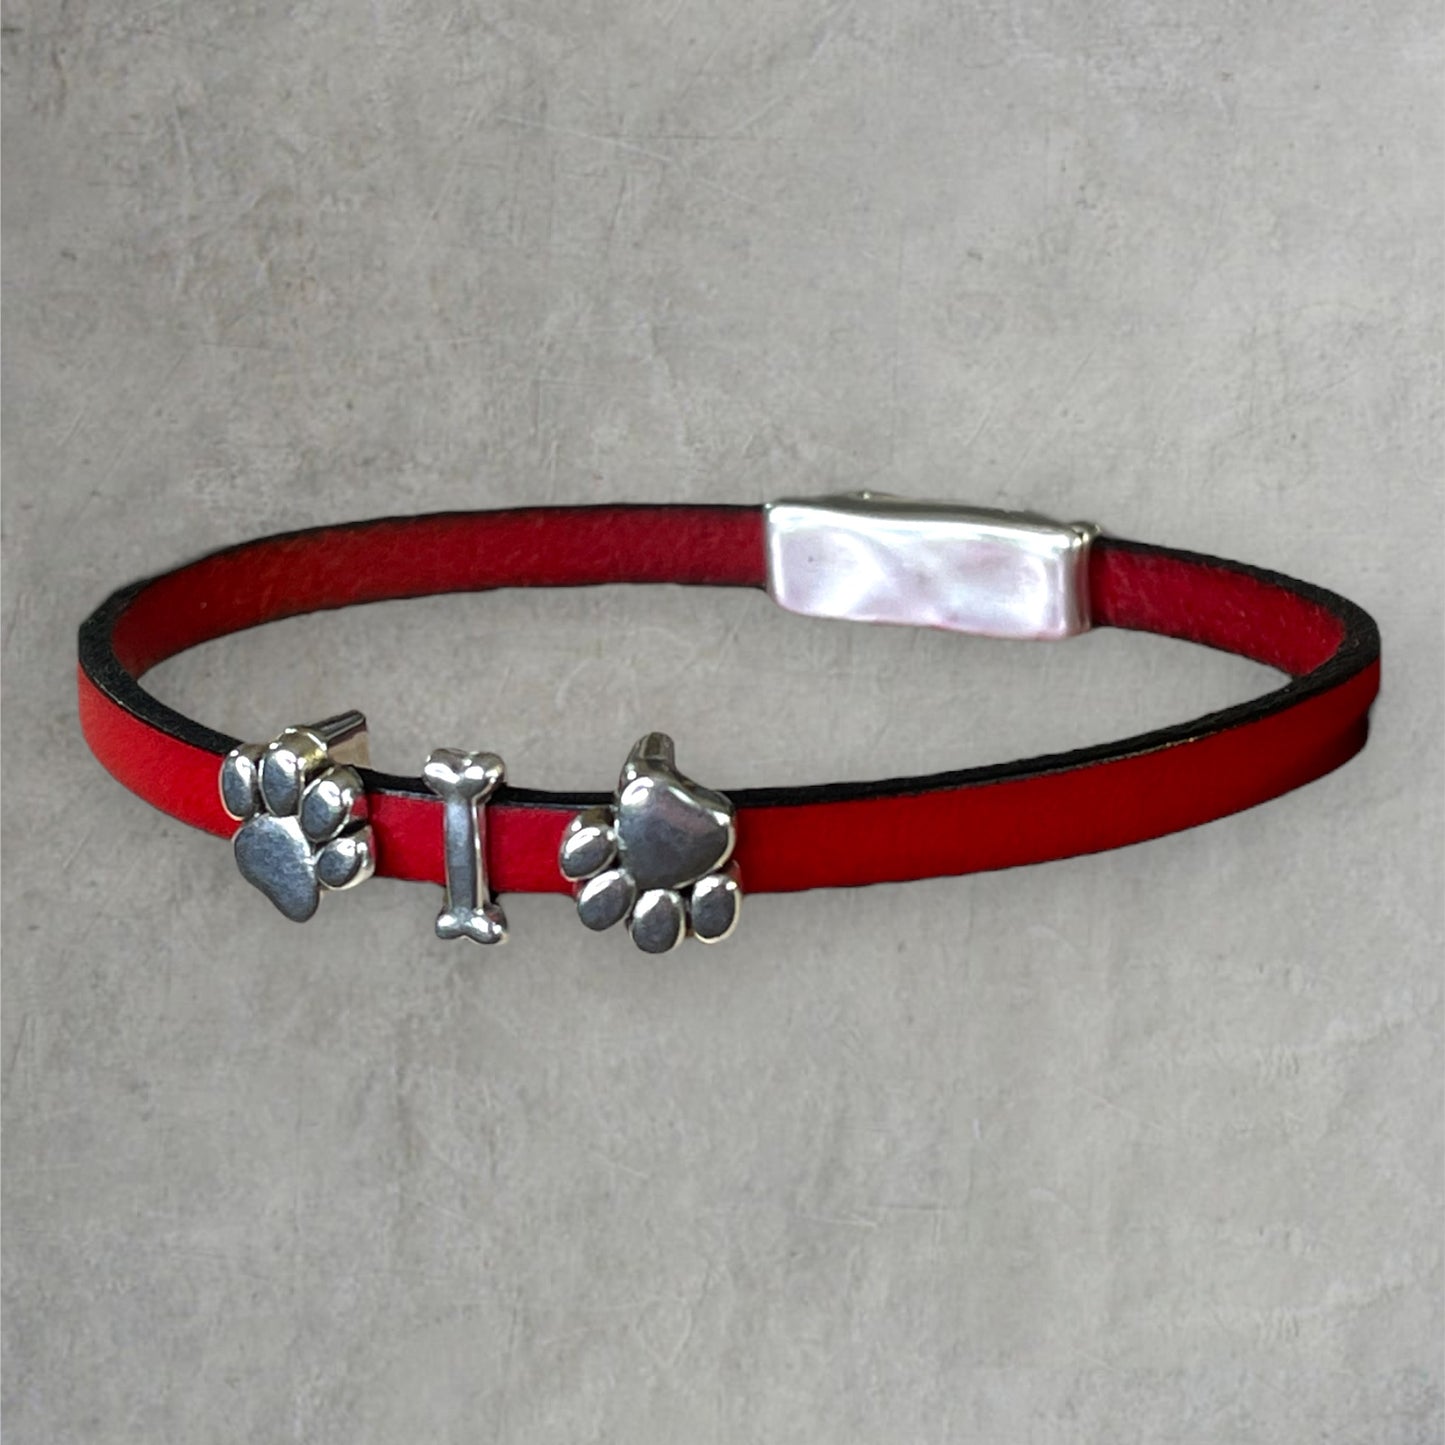 Leather and Silver (Zamak) Cuff Bracelet With Slide Paw and Bone Charms and Magnetic Closure